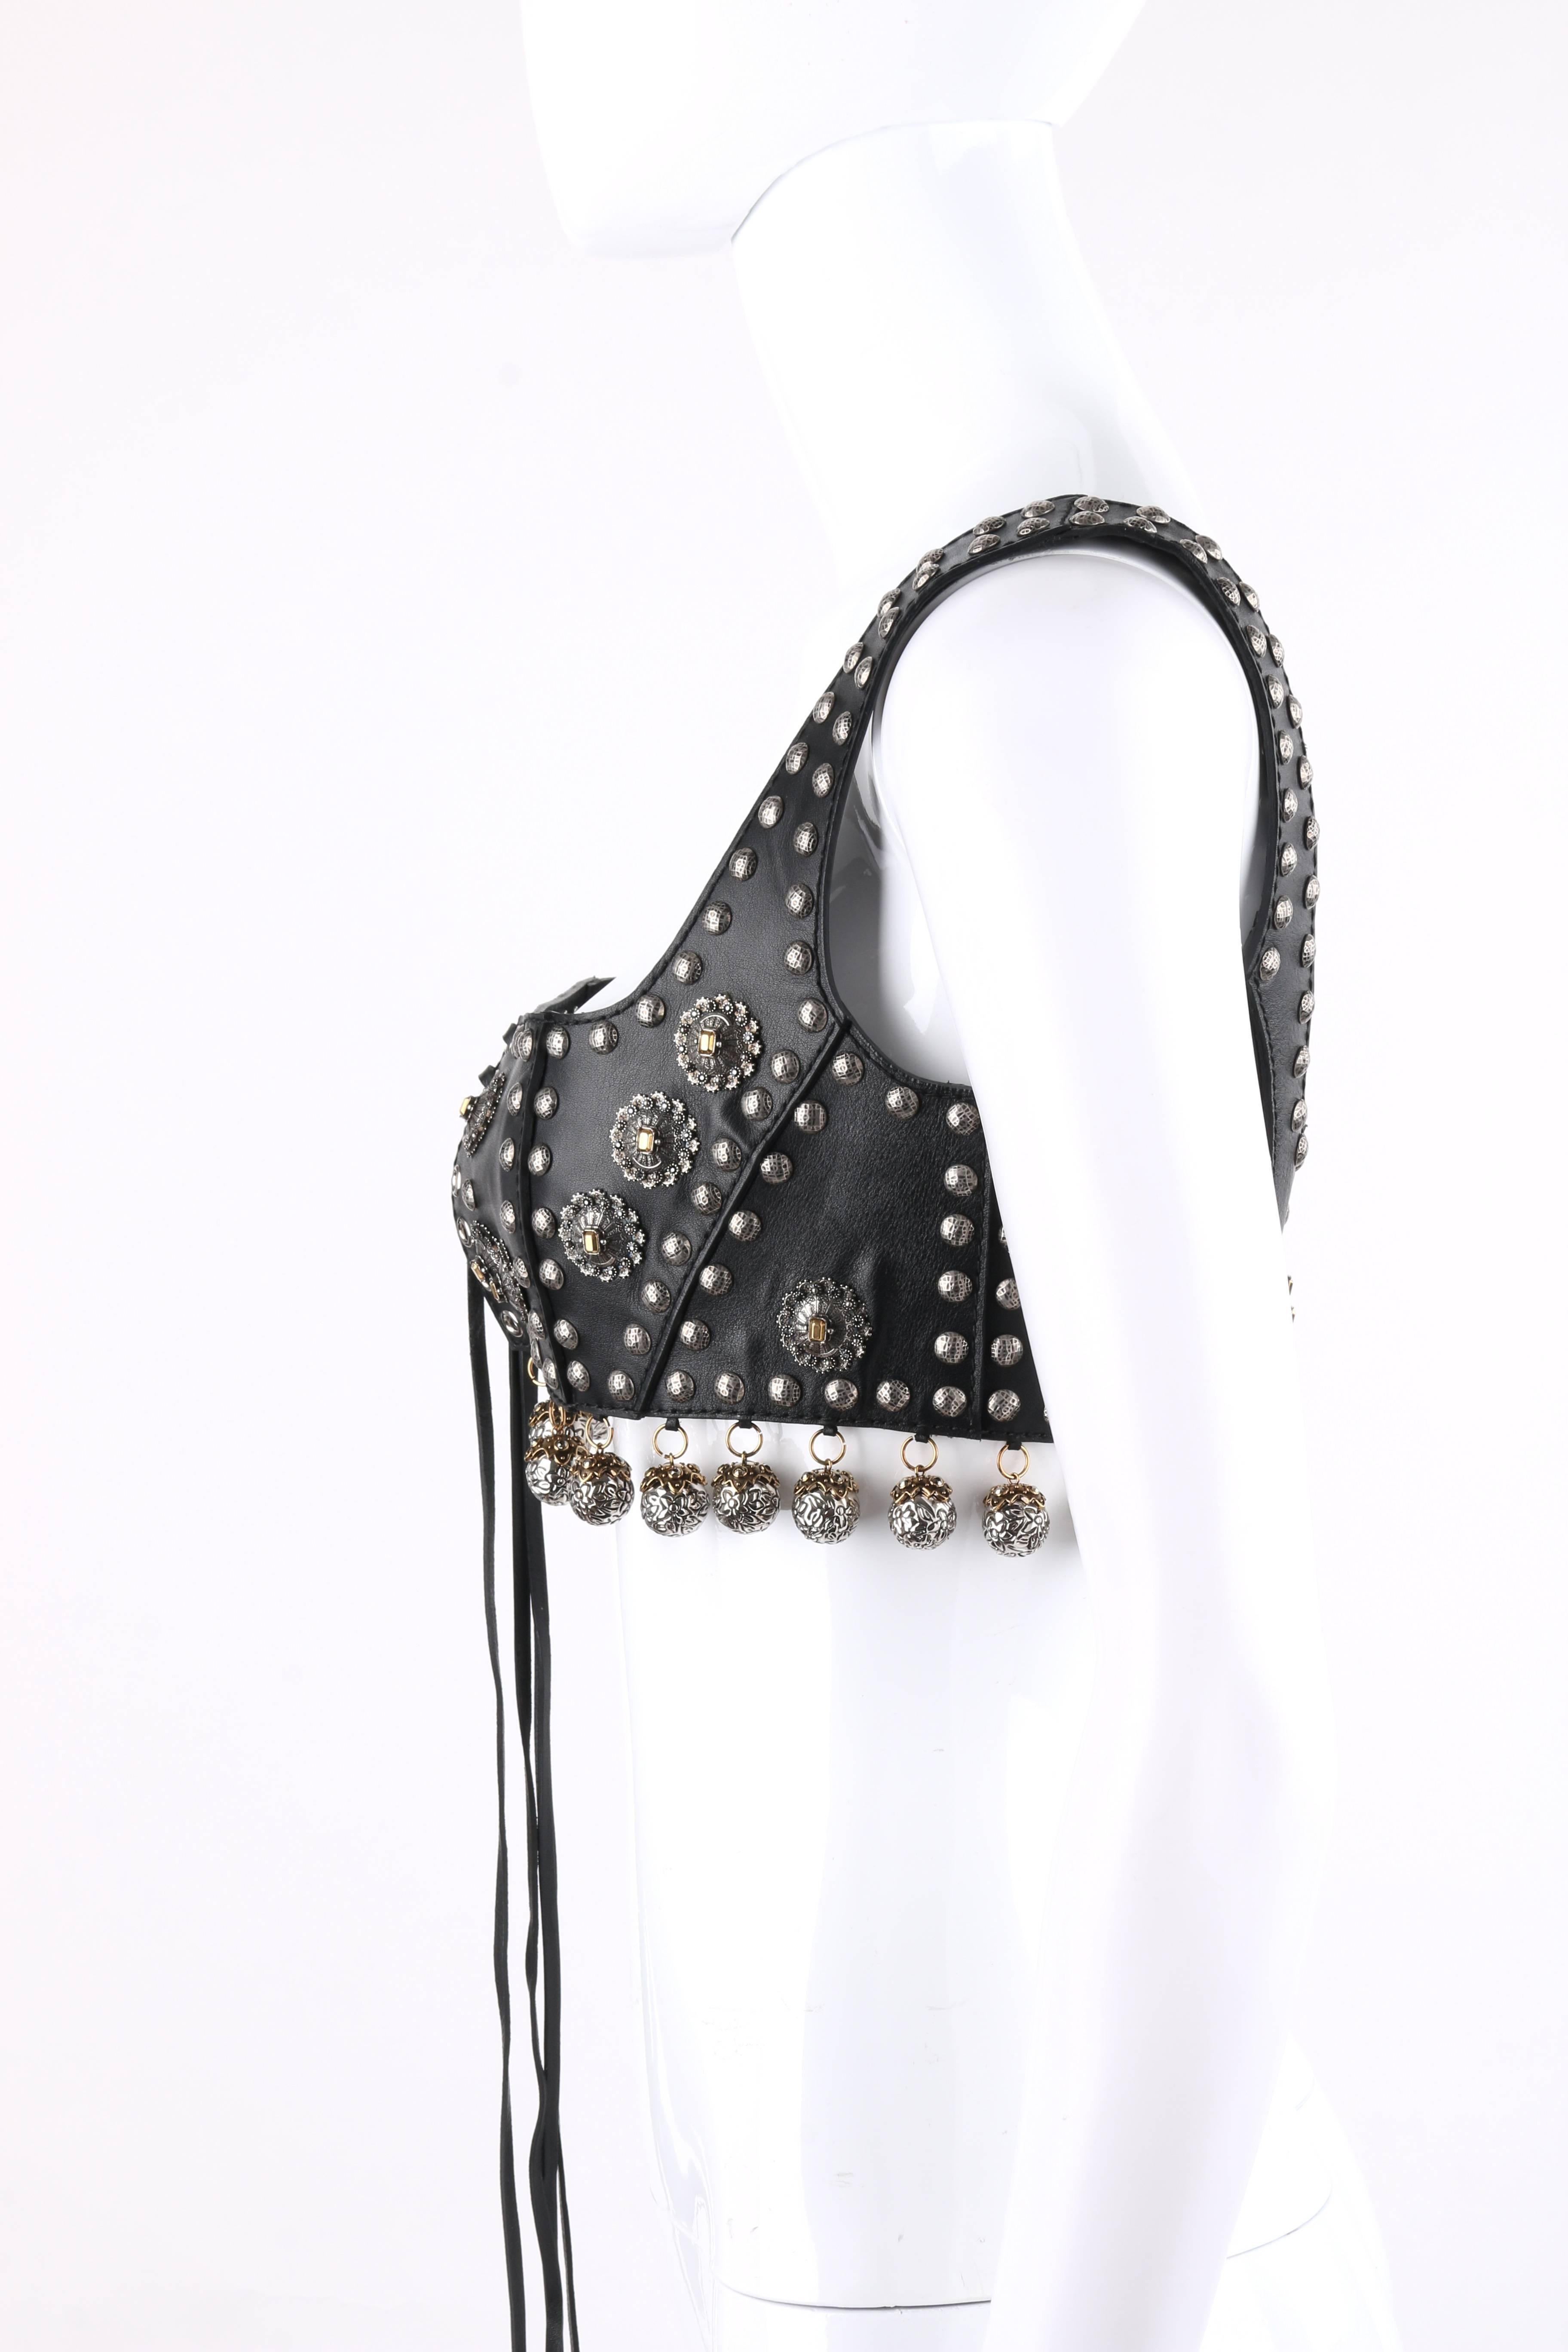 ALEXANDER McQUEEN S/S 2015 Black Nappa Leather Studded Lace Up Bra Top Bustier 1